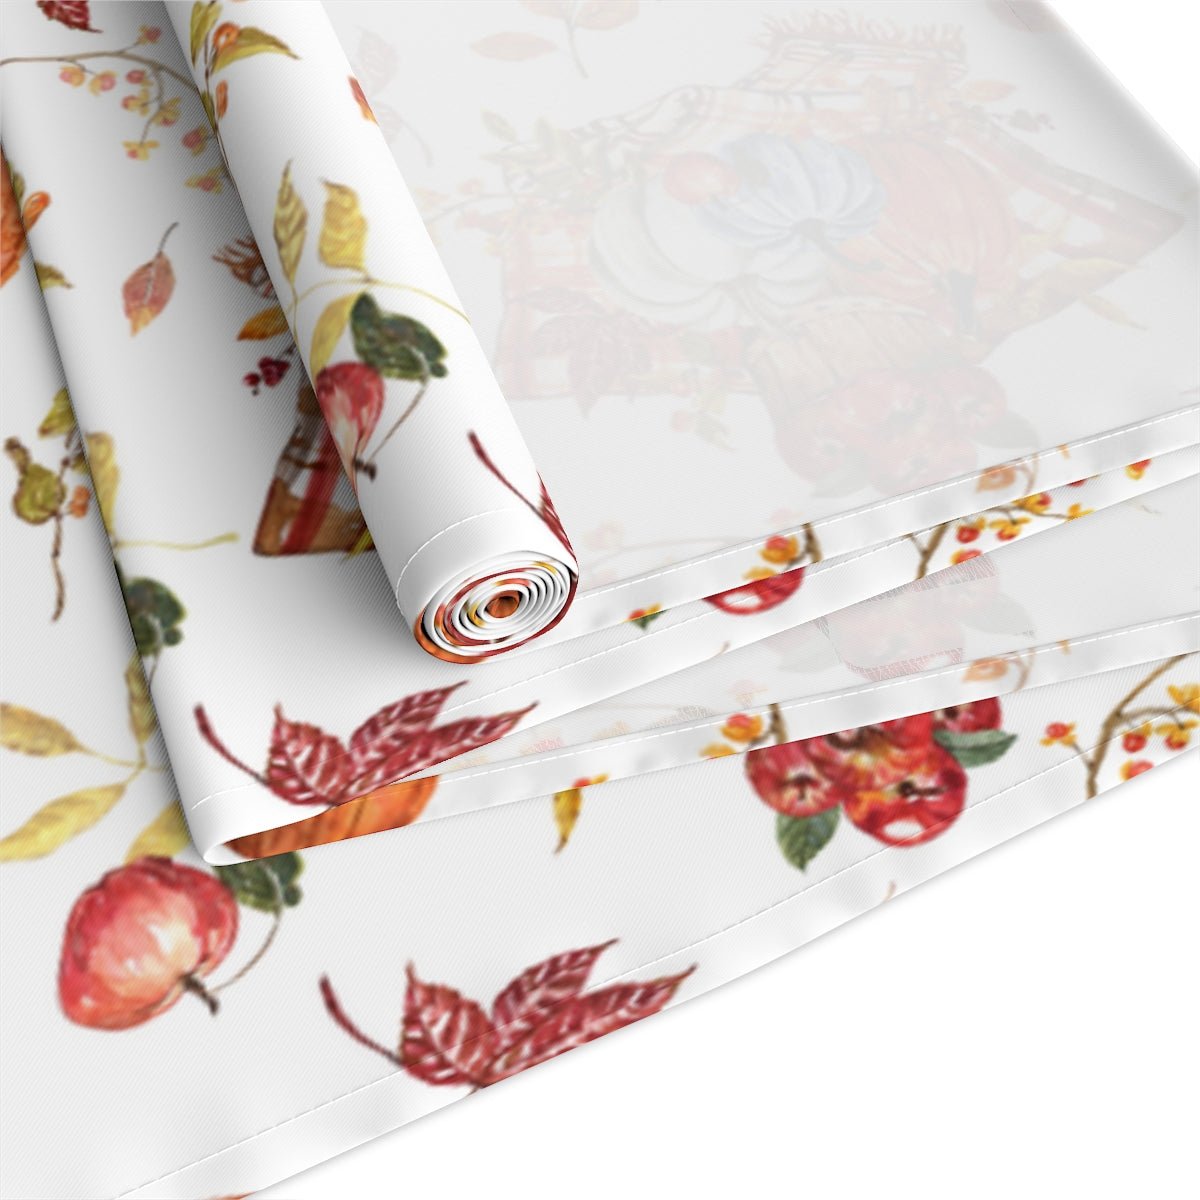 Fall Pumpkins and Apples Table Runner 16" × 72" - Puffin Lime